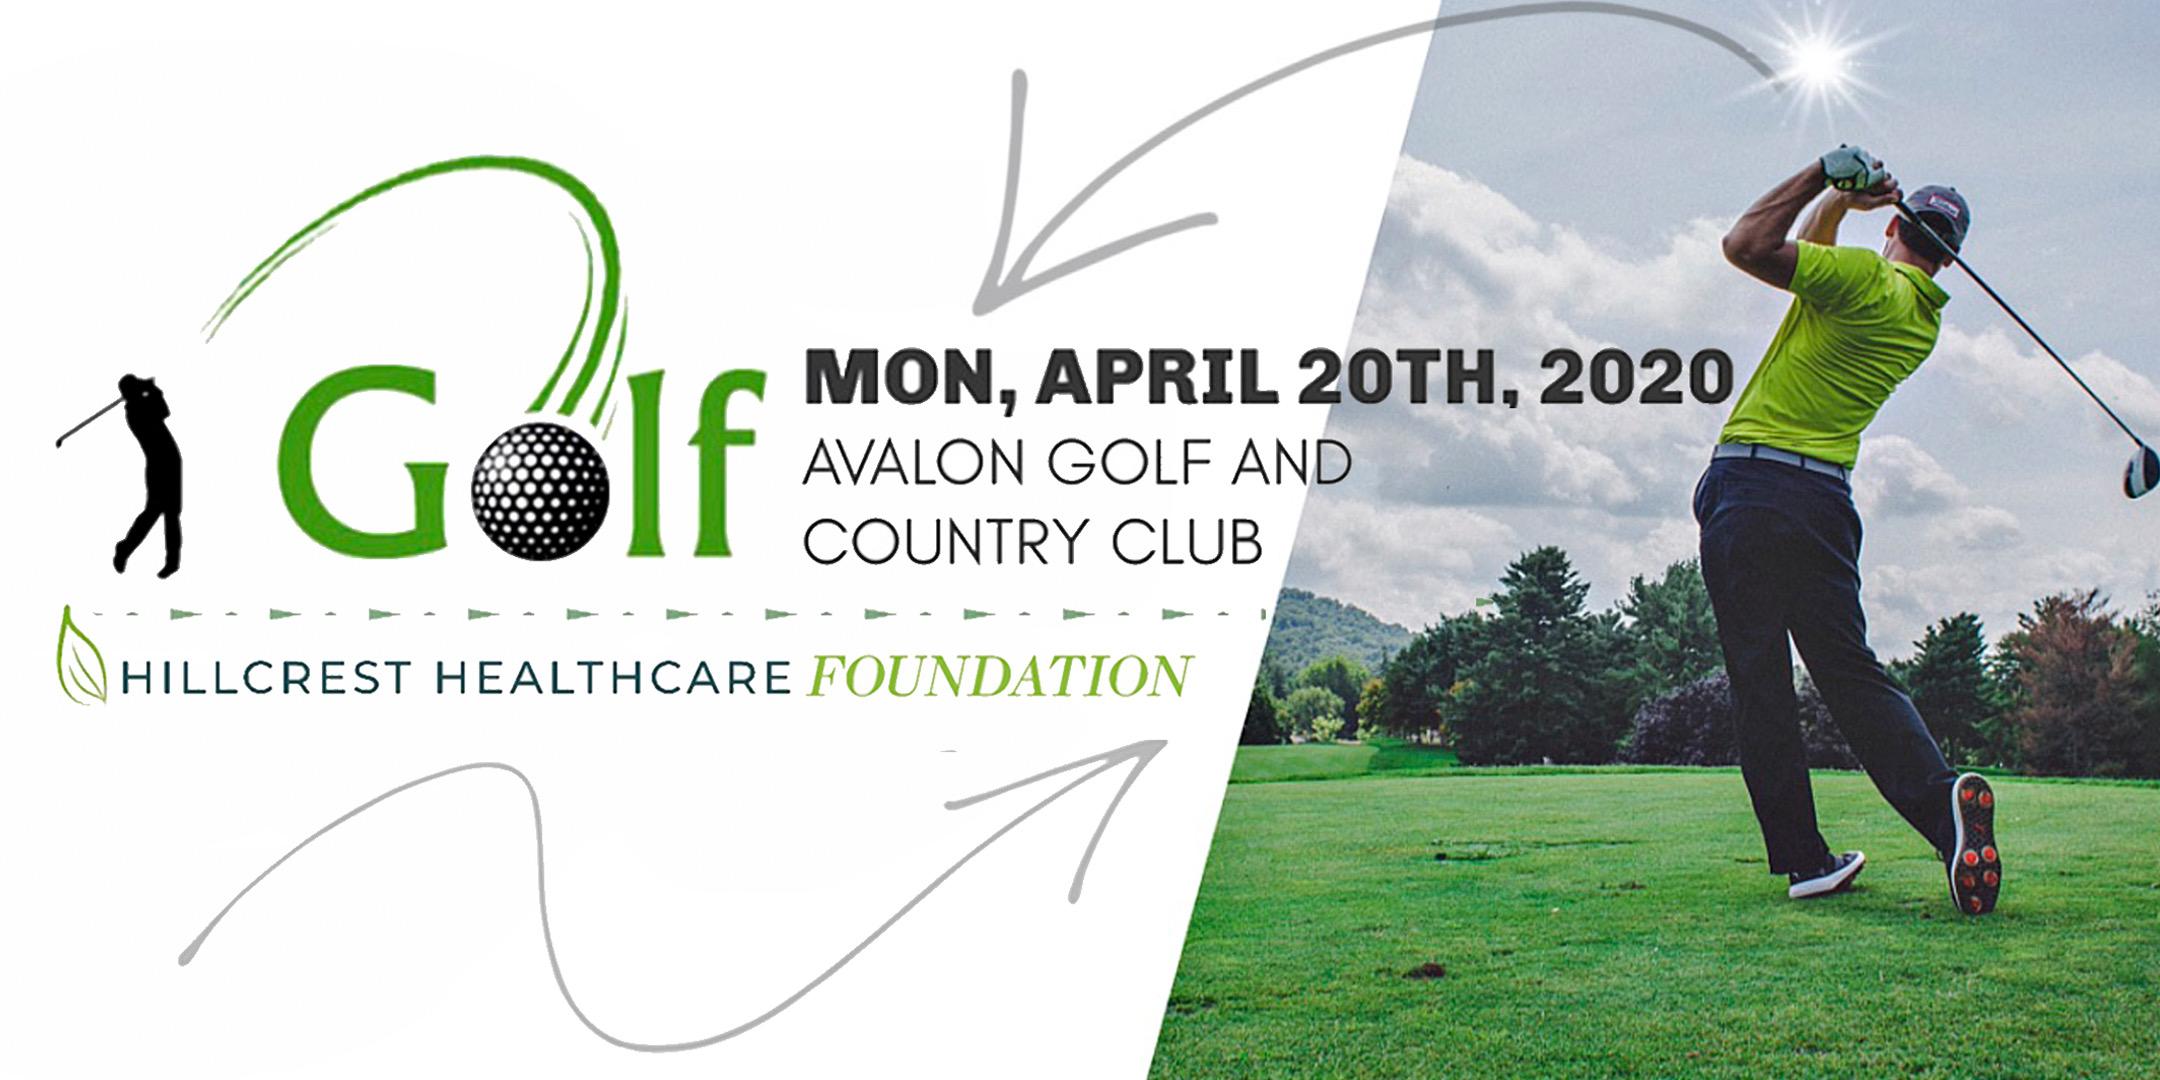 The First Annual Hillcrest Healthcare Foundation Golf Tournament